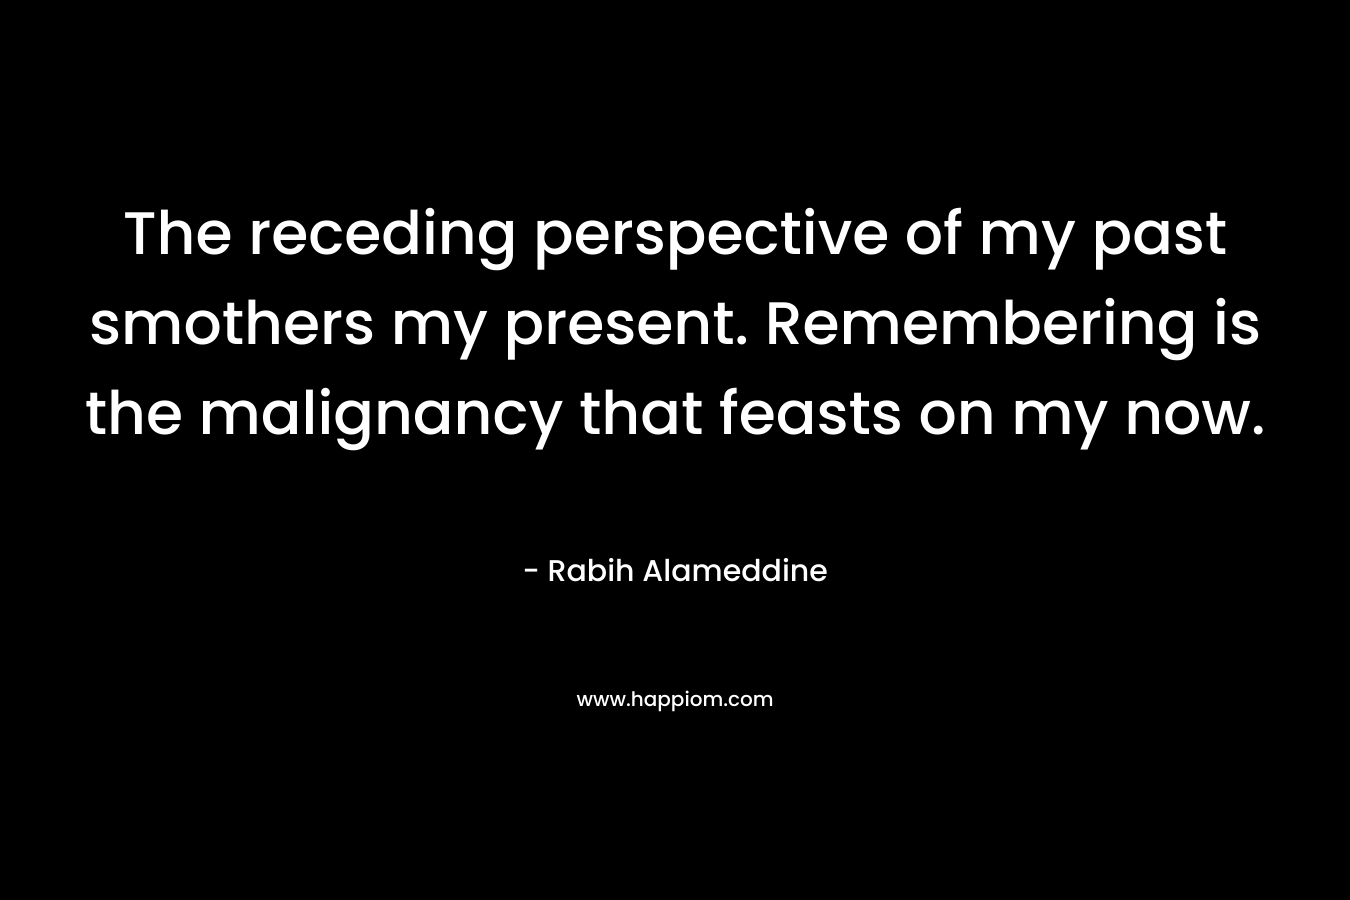 The receding perspective of my past smothers my present. Remembering is the malignancy that feasts on my now. – Rabih Alameddine